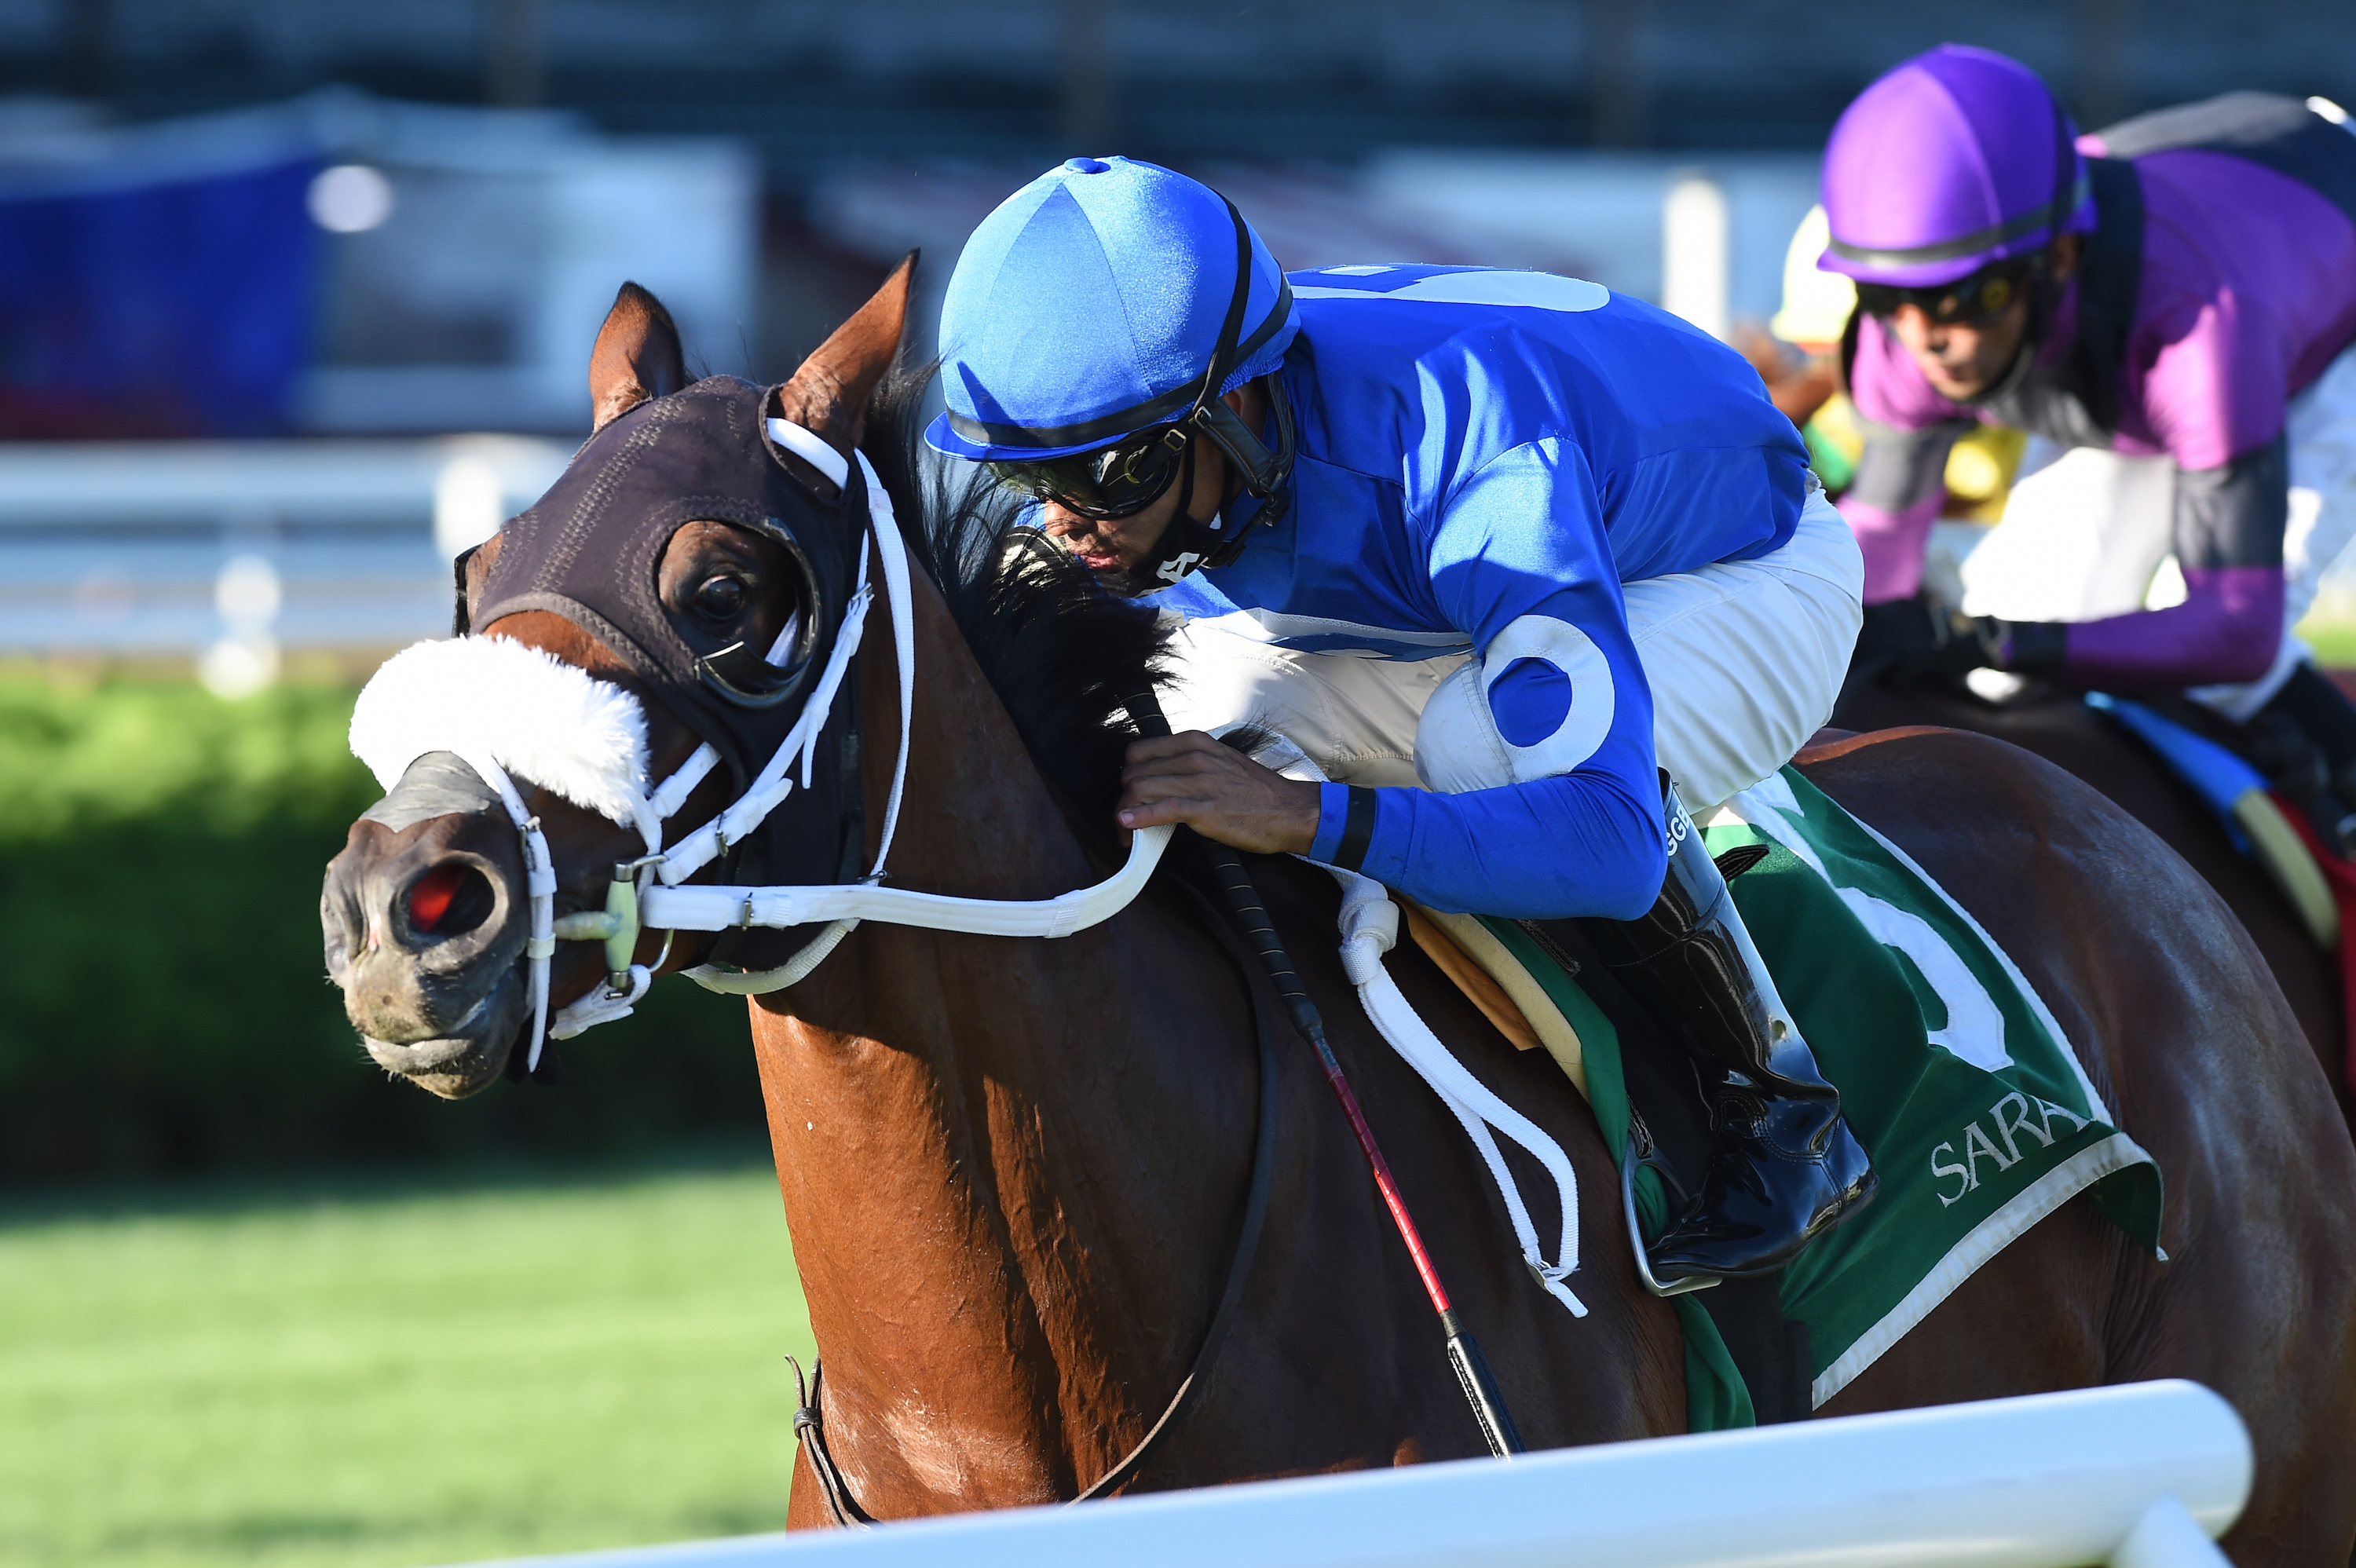 Success at Saratoga: Rinaldi, owned and trained by the Bonds, winning the West Point Stakes earlier this month. Photo: Chelsea Durand/NYRA.com